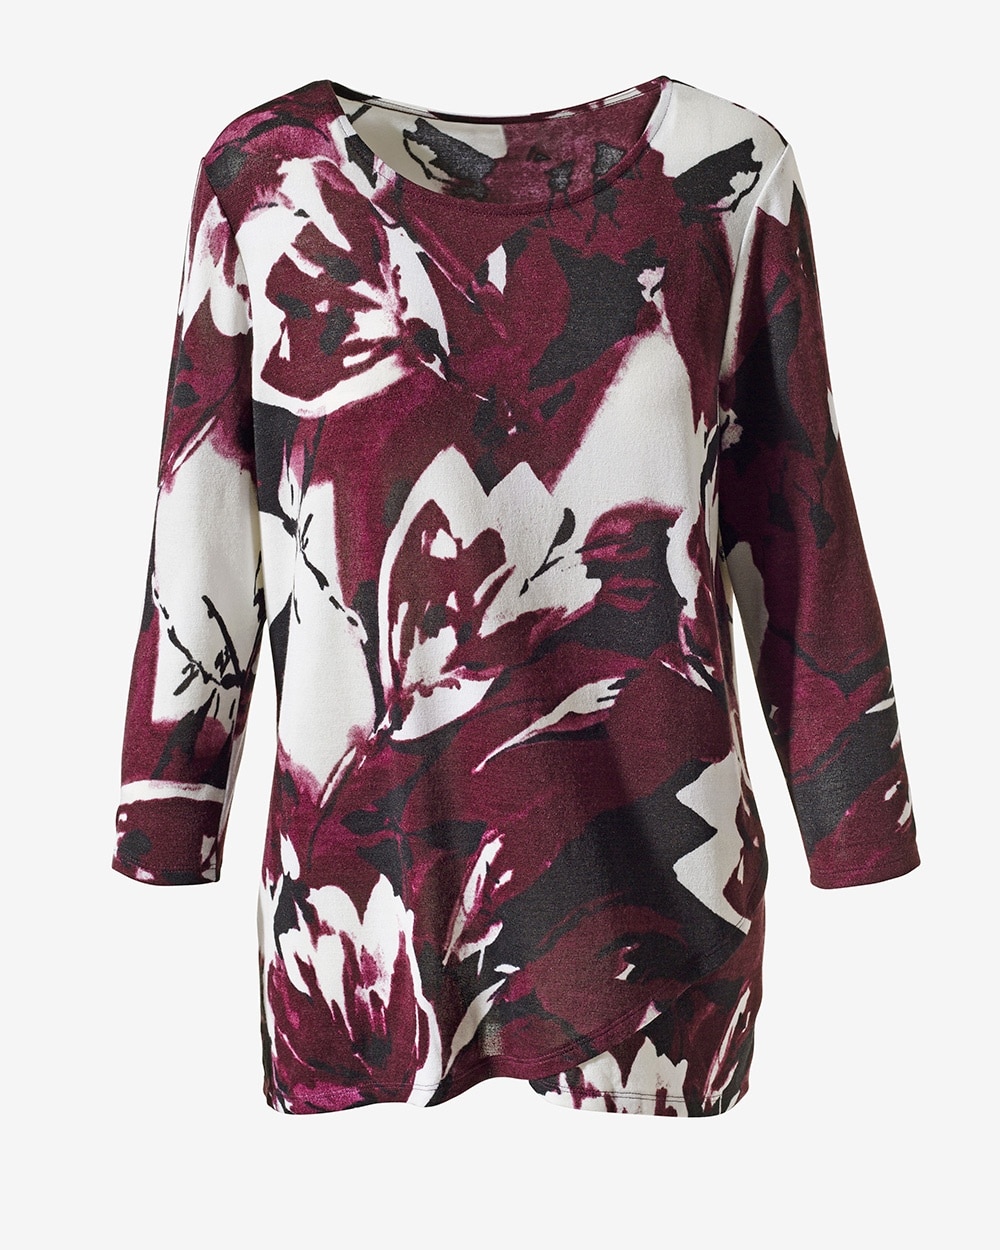 Easywear CoziSoft Abstract Floral Scoop-Neck Tunic